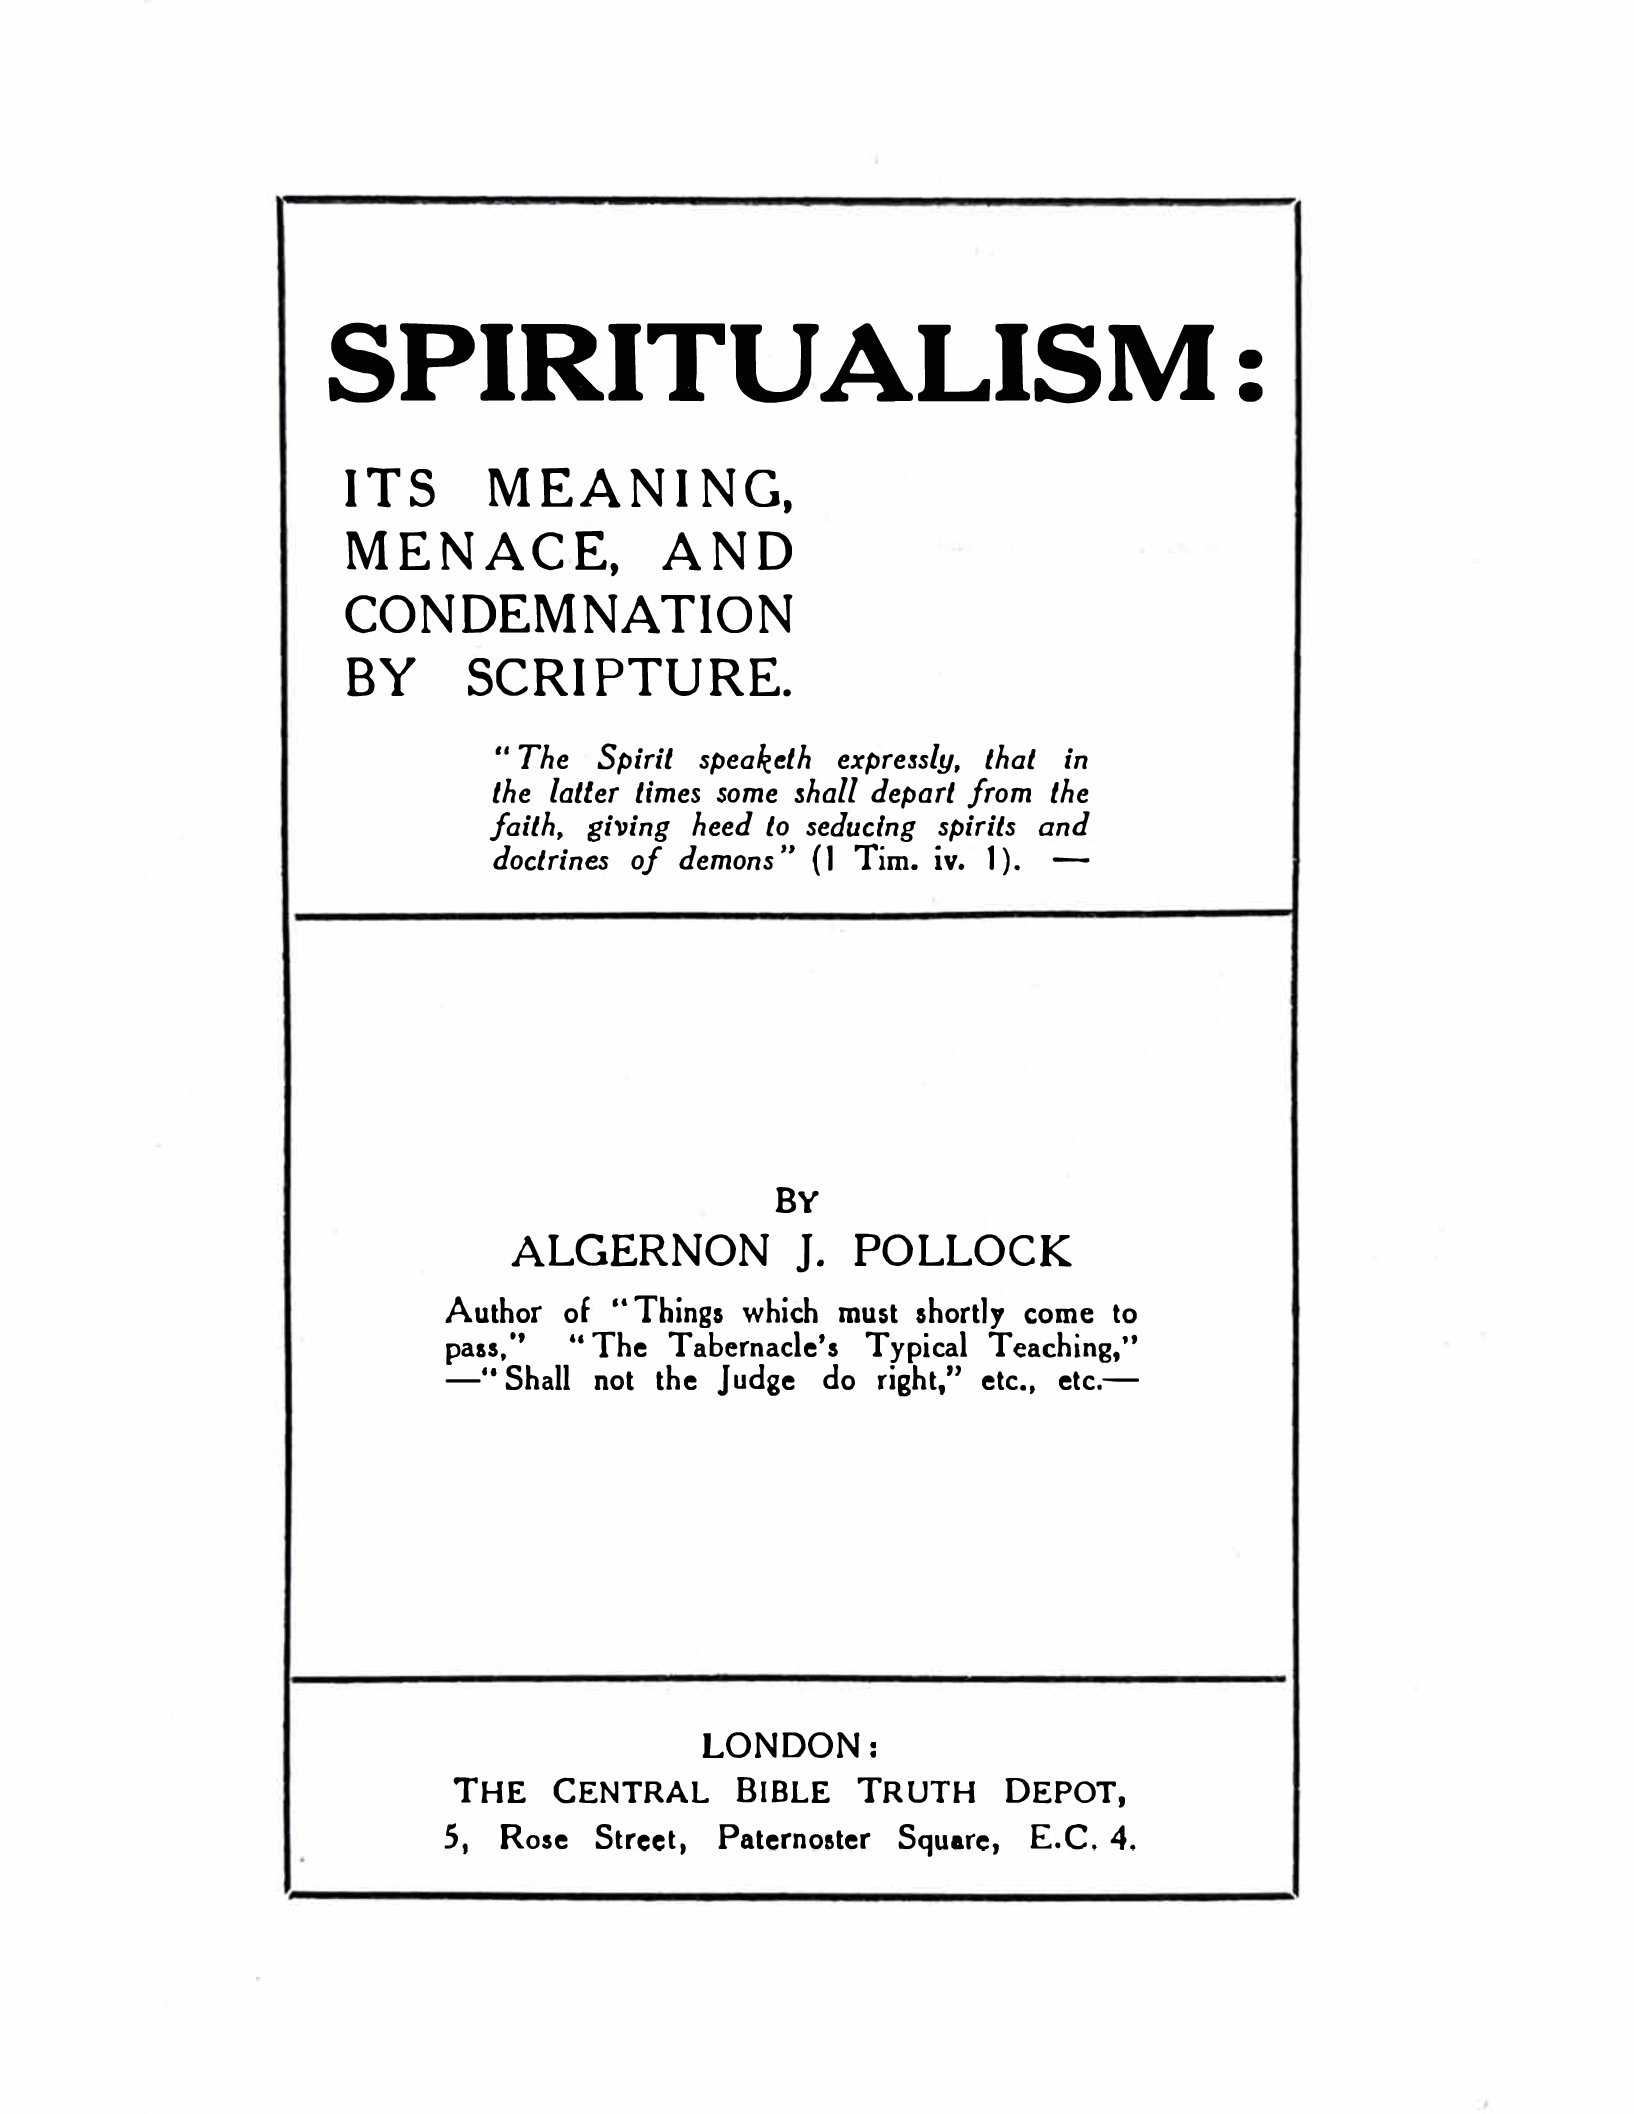 Spiritualism: Its Meaning, Menace, and Condemnation by Scripture